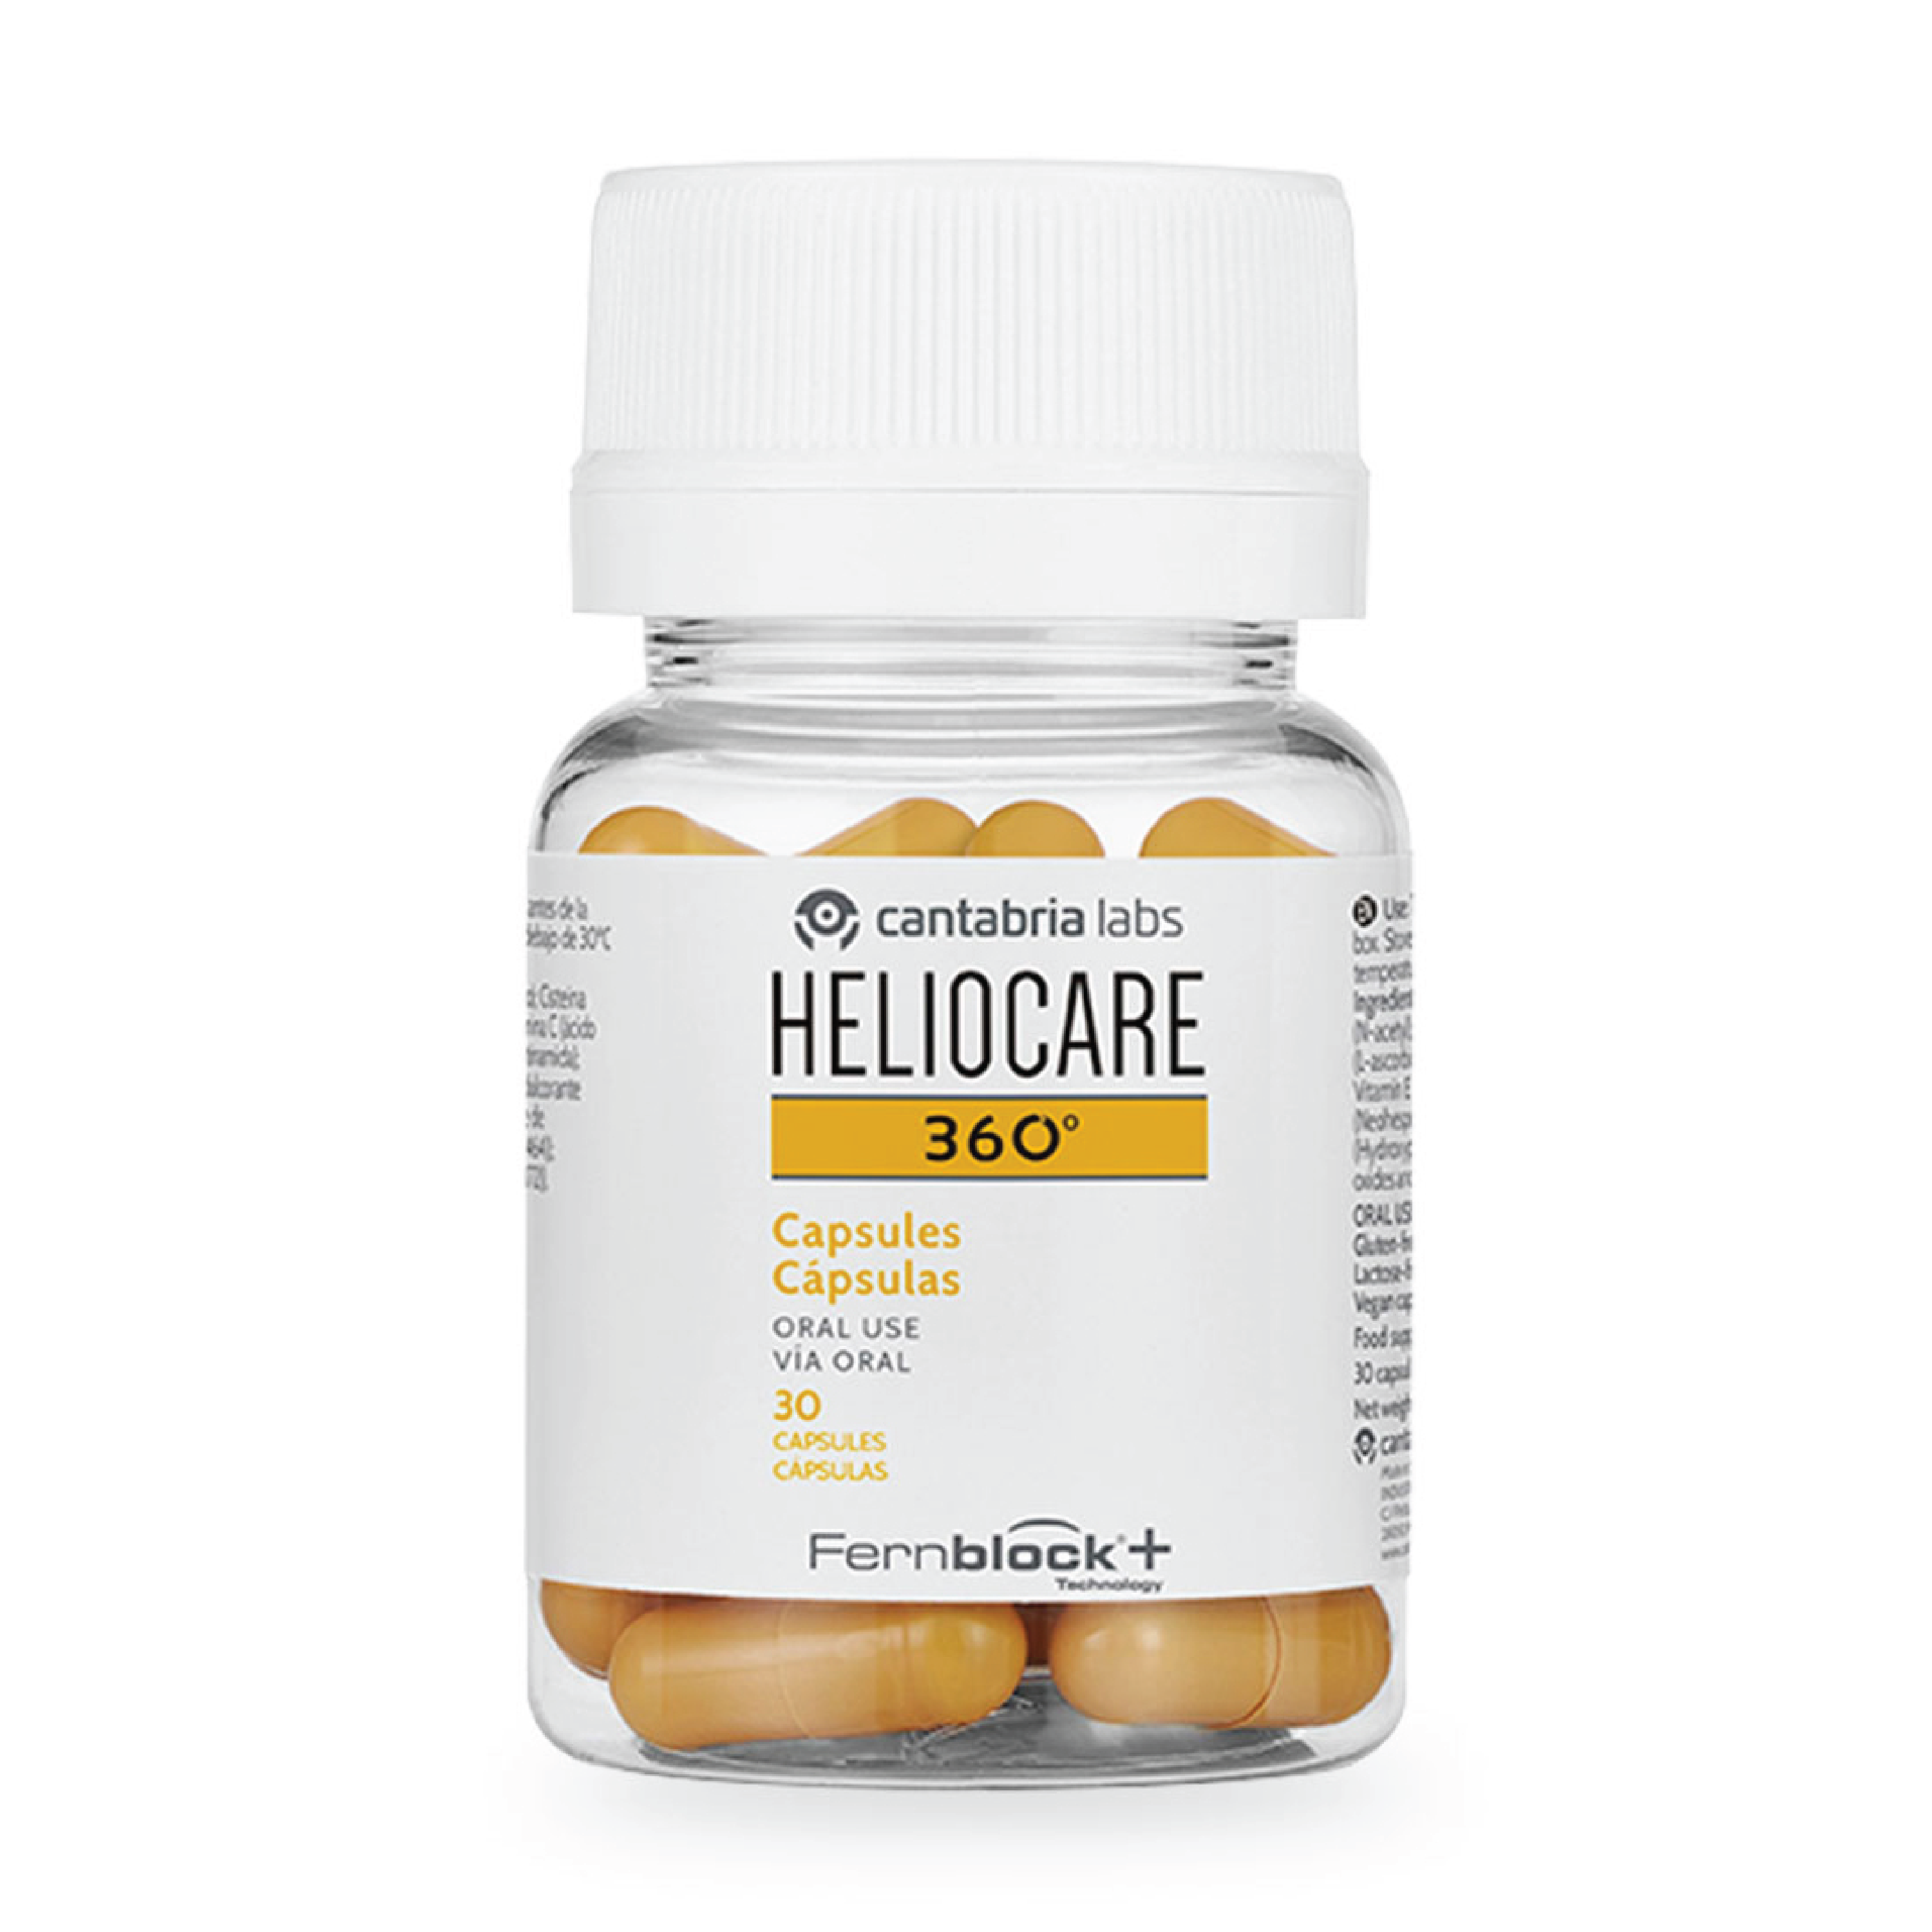 Heliocare 360° Oral Capsules, 30 kapsler